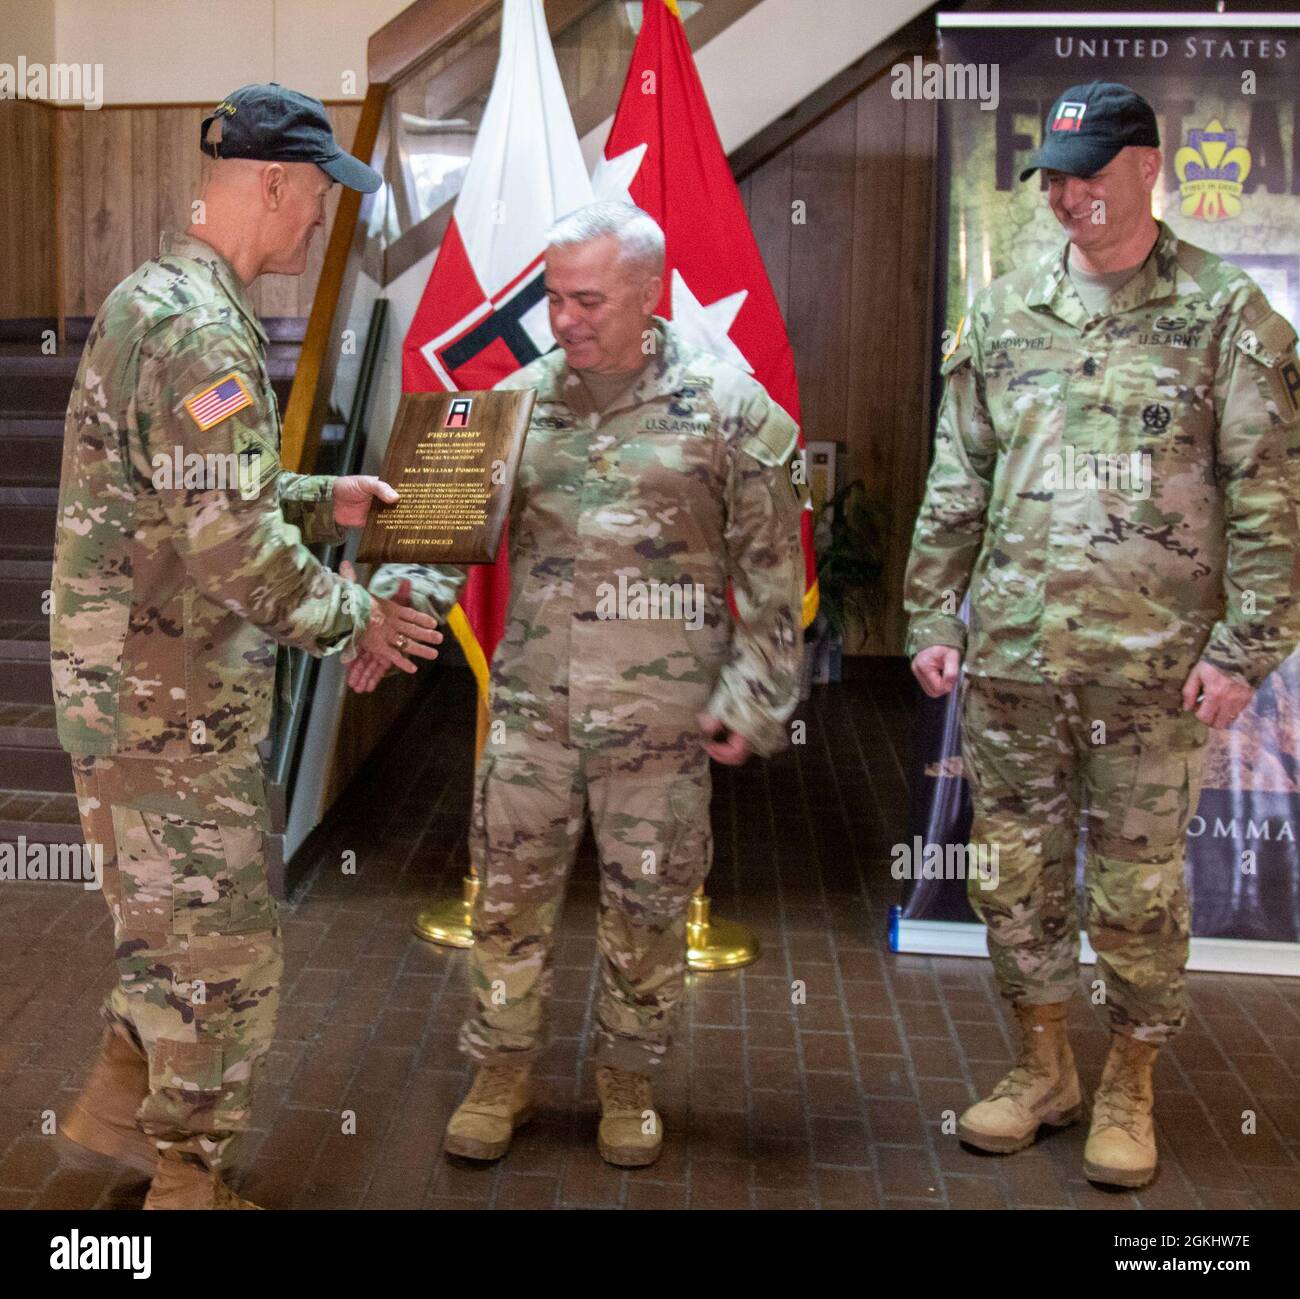 U.S. Army Lt. Gen. Thomas S. James, Jr., First Army commanding general (left), and Command Sgt. Maj. John P. McDwyer, First Army command sergeant major (far right), presents the First Army Individual Award of Excellence in Safety to Maj. William E. Ponder, motorcycle safety coordinator, G-3 future operations officer for Division West, First Army, during an awards ceremony held at Division West Headquarters in Fort Hood, Texas, April 27. Ponder’s oversight of the Motorcycle Training Program was selected as the best safety program across the Division. The First Army Individual Award of Excellenc Stock Photo